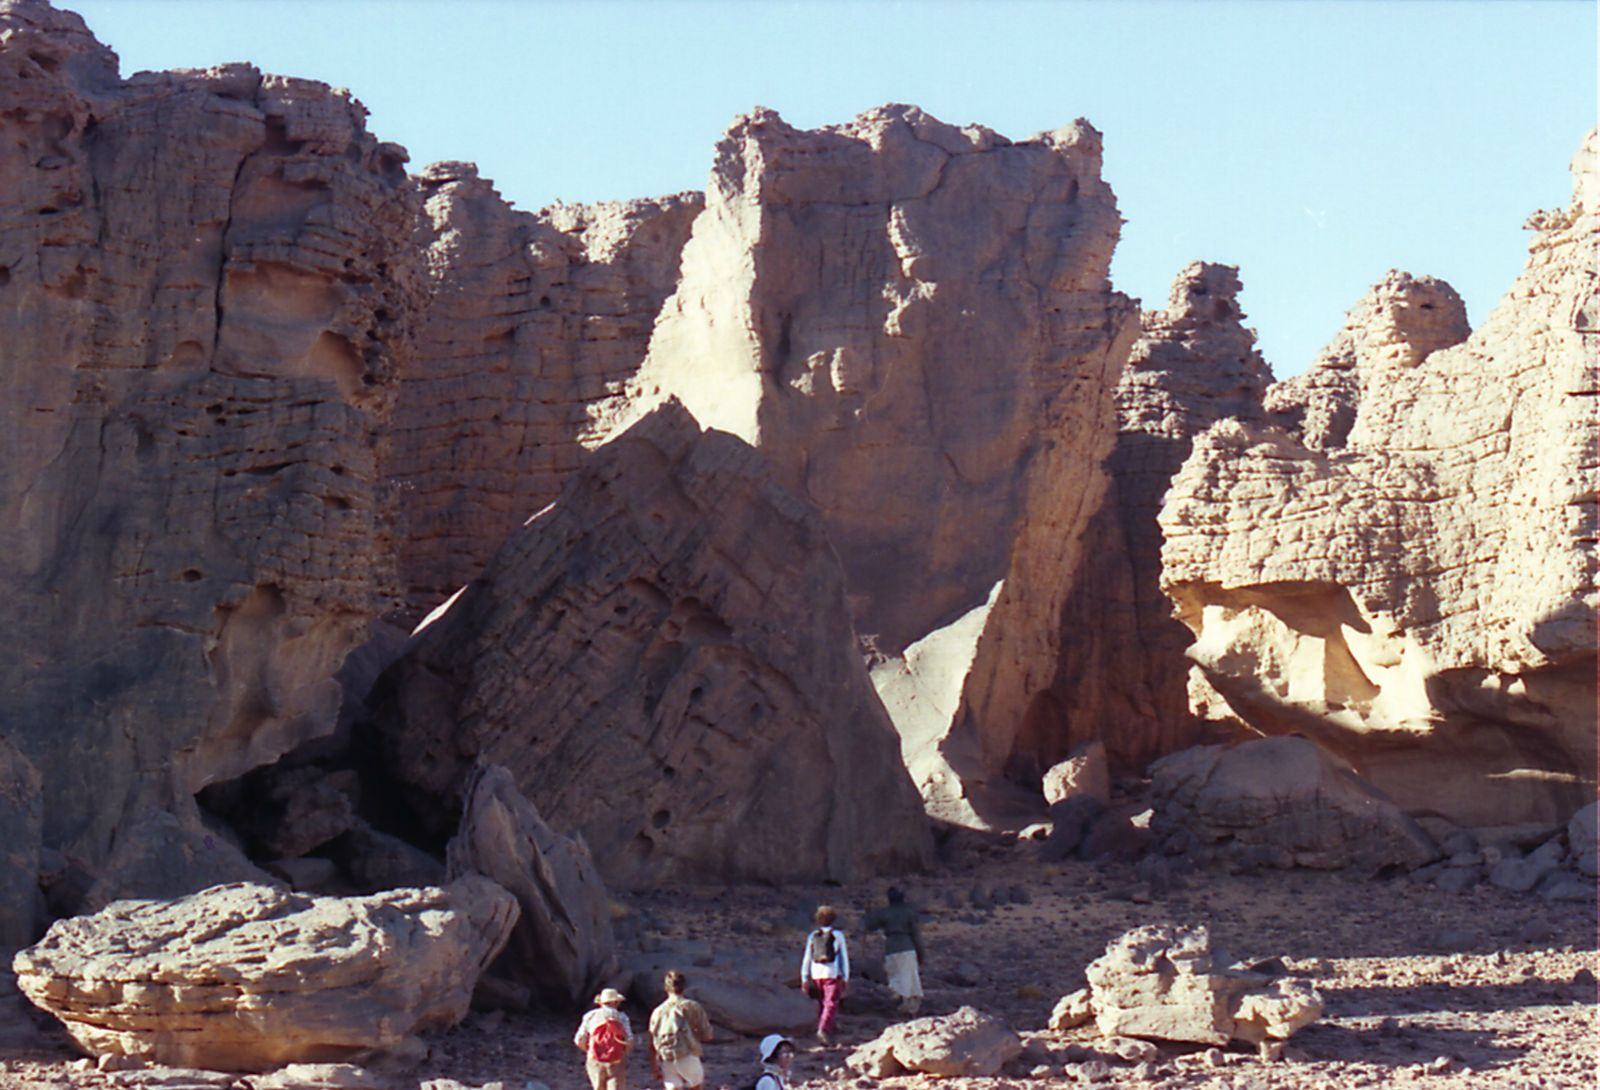 The wind shaped the rocks into fantastic architecture.